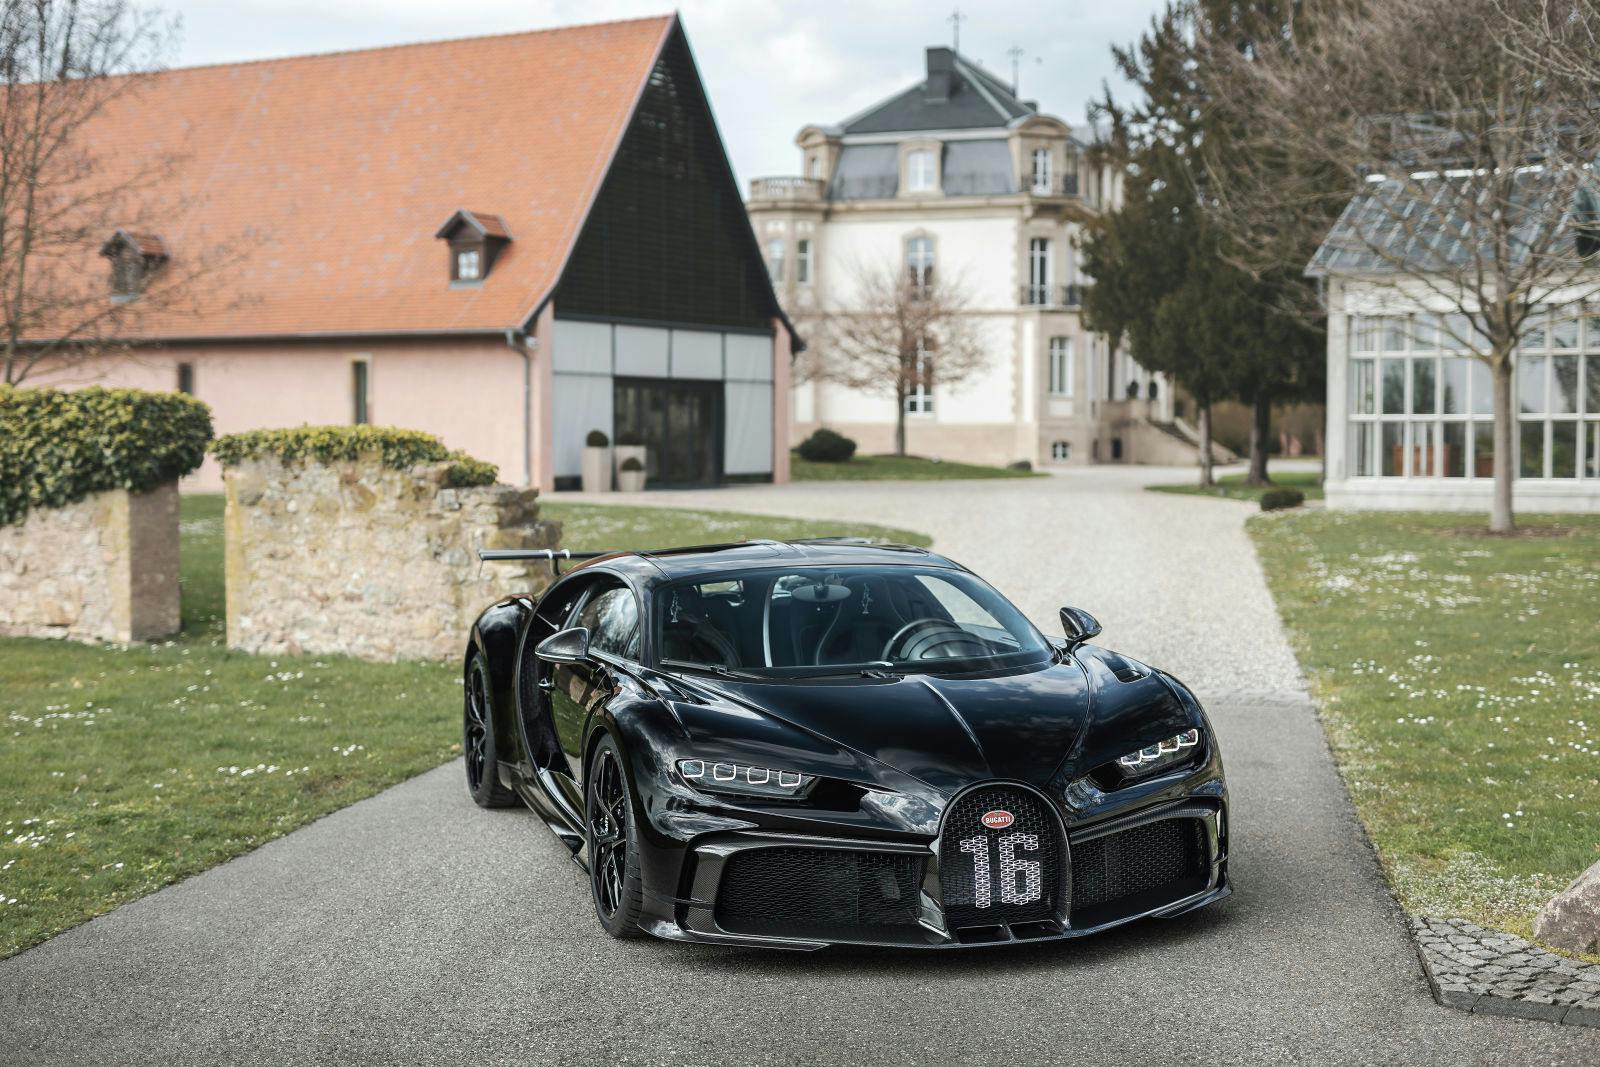 The Bugatti Chiron Pur Sport in ”Nocturne”, with details in “Grey Carbon”, “Gris Rafale” and “Gun Powder“.